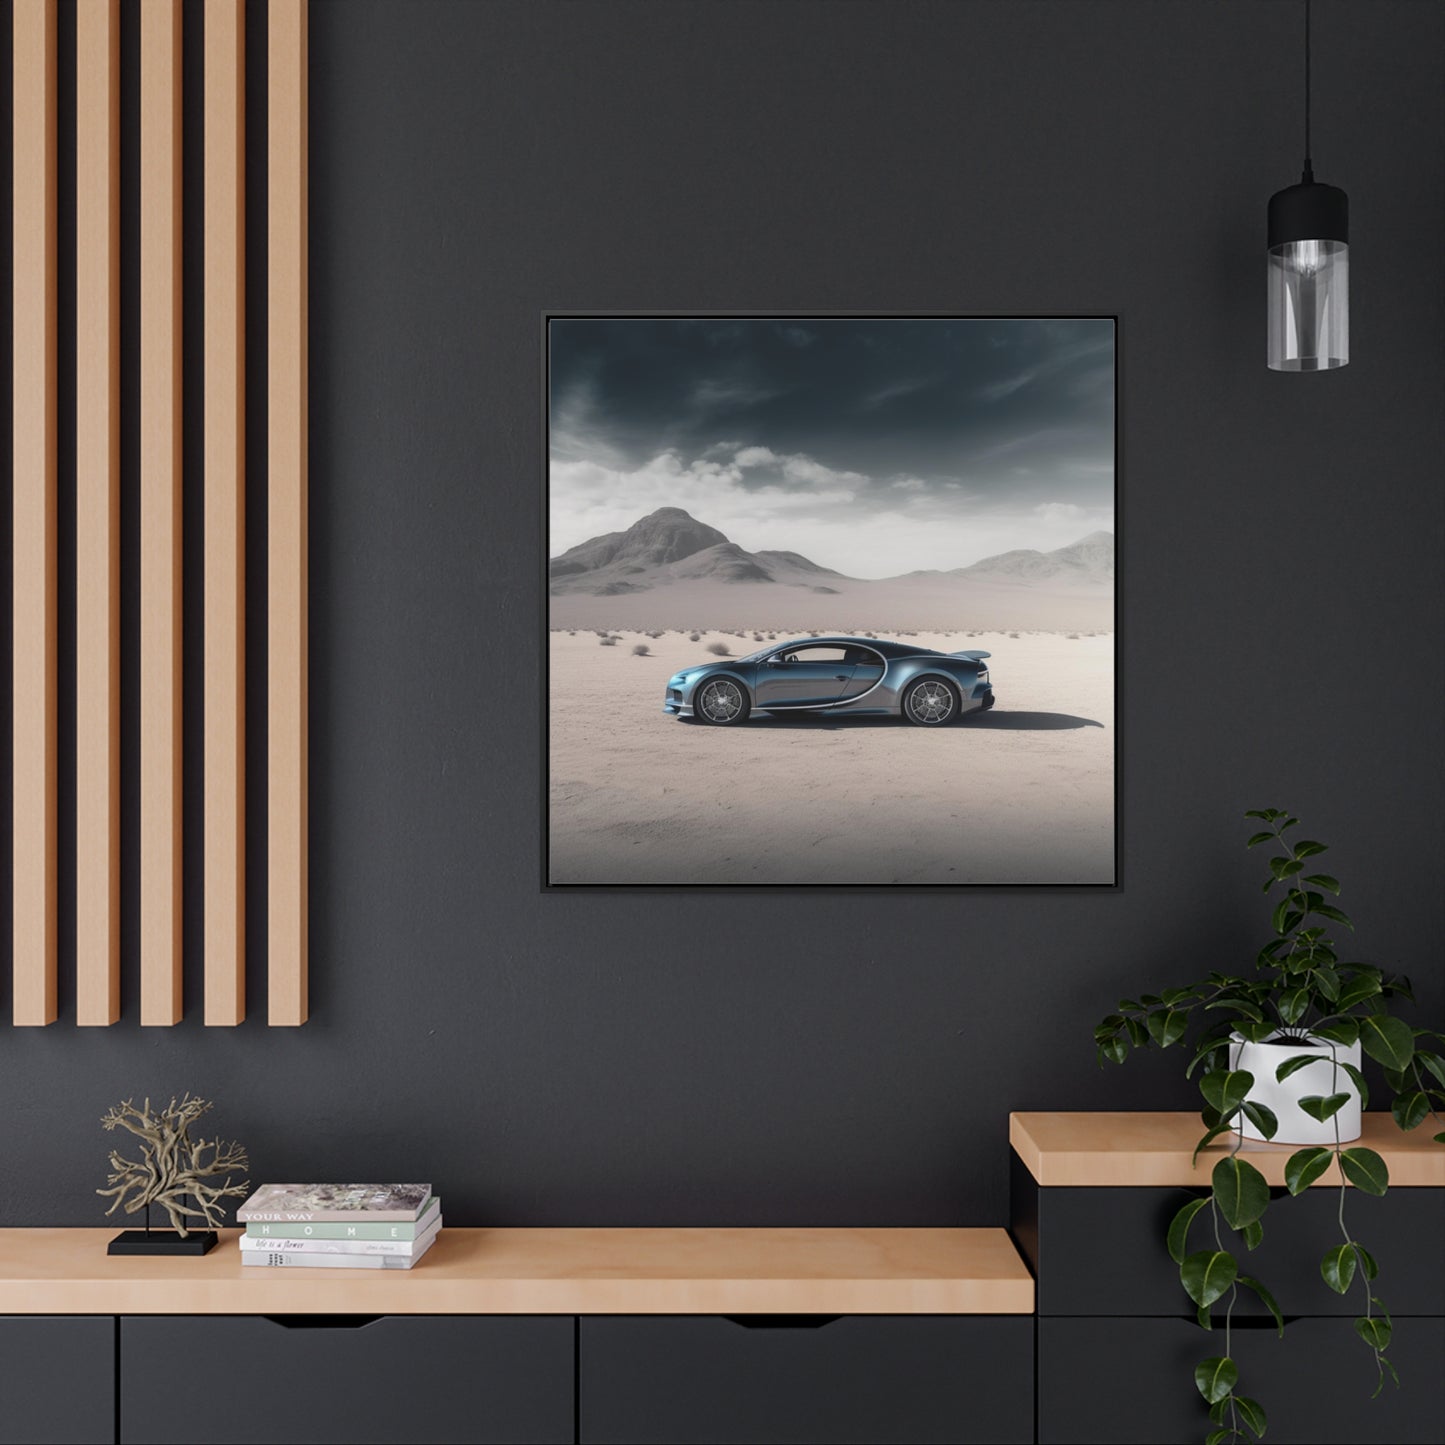 Gallery Canvas Wraps, Square Frame Bugatti Real Look 1